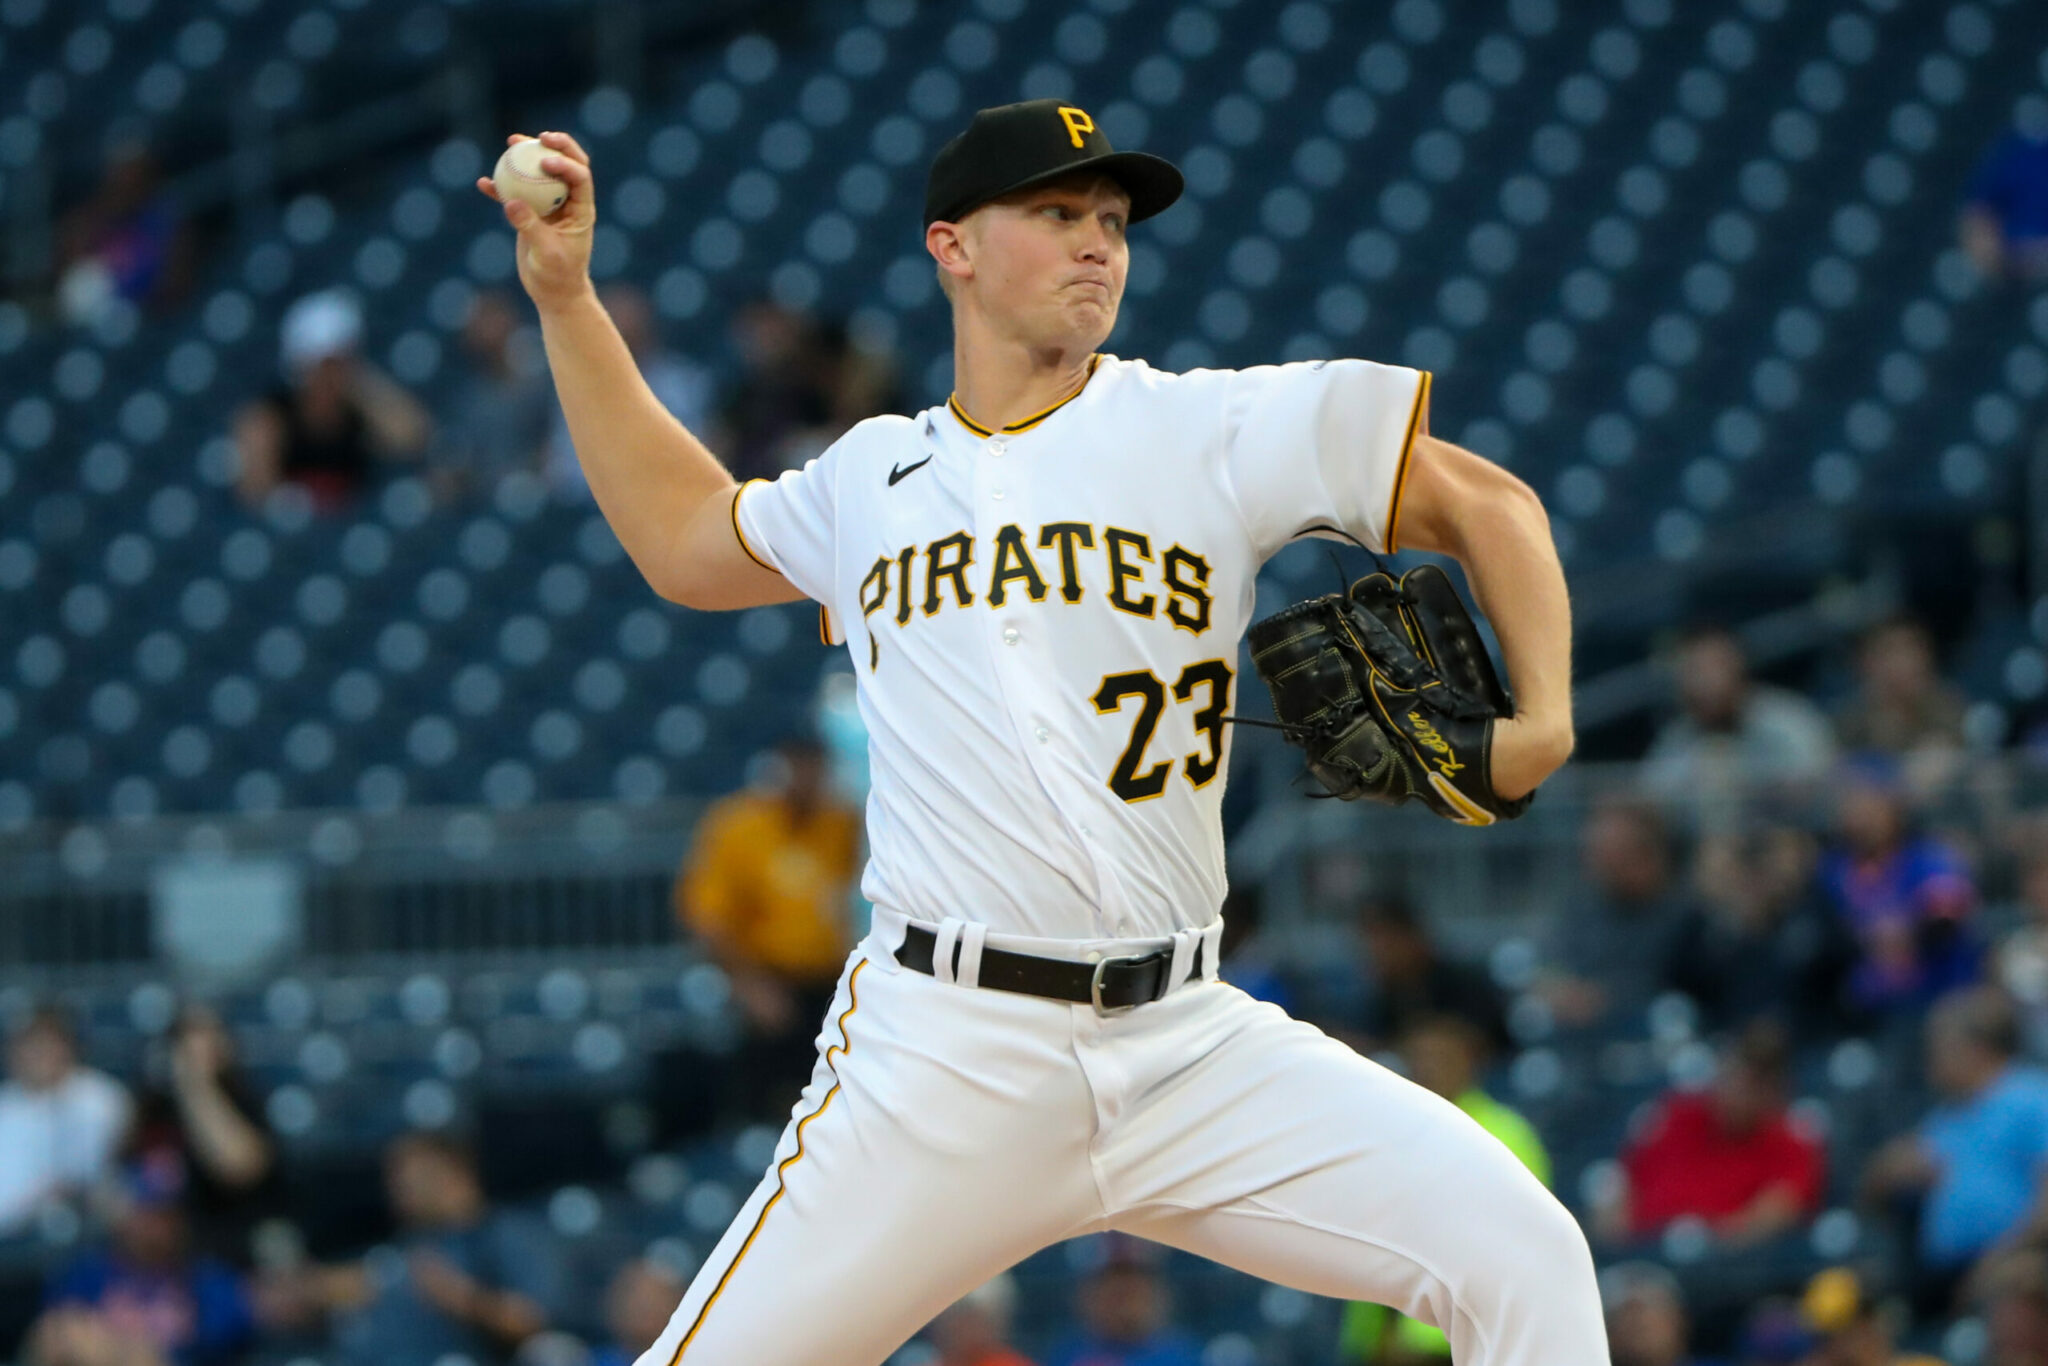 Pirates Roundtable: Who Will Pitch the Most Innings For the Pirates in 2023?